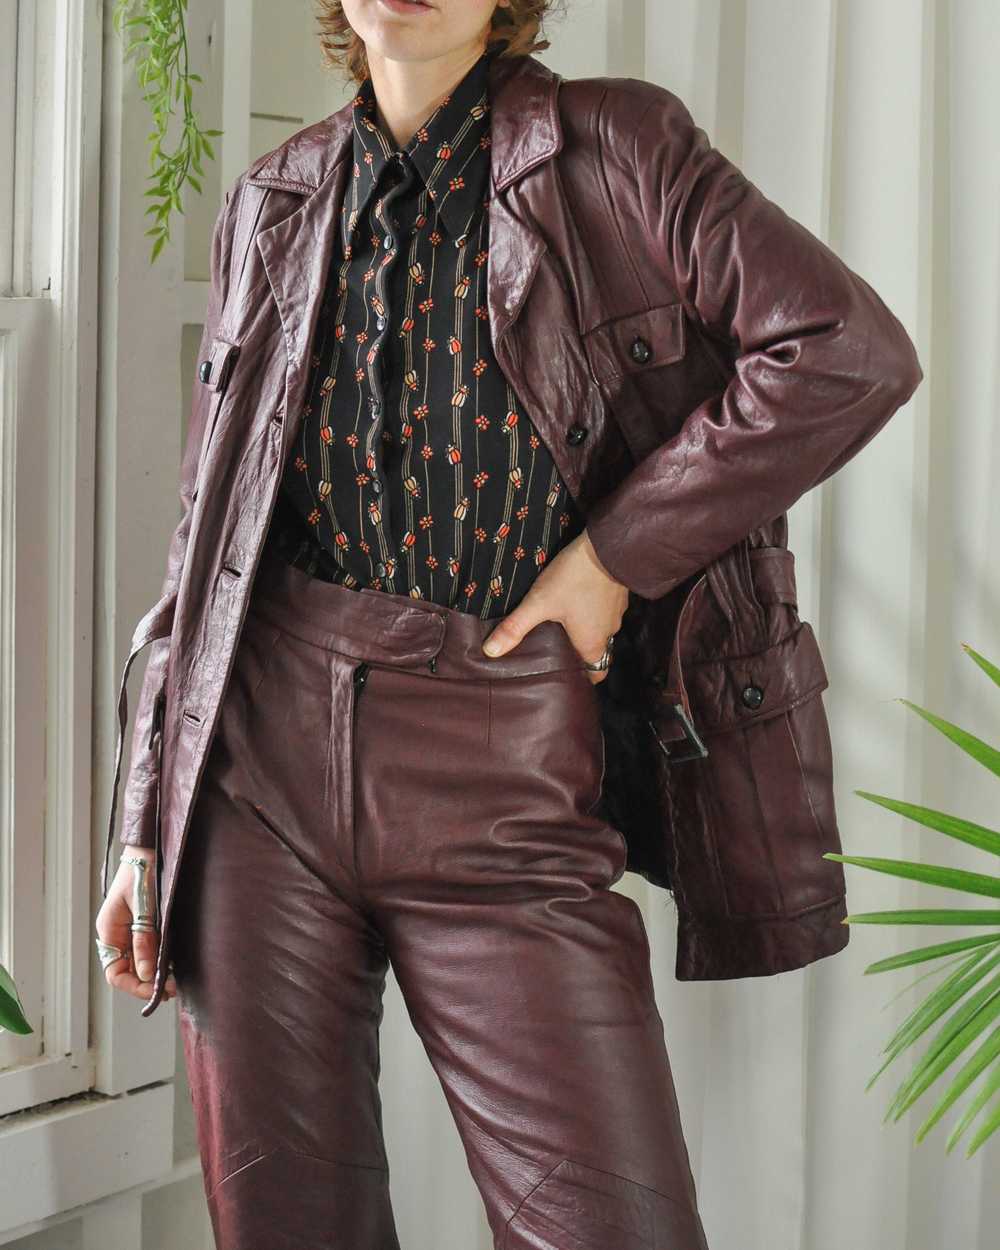 70s Burgundy Leather Pant Suit - image 2